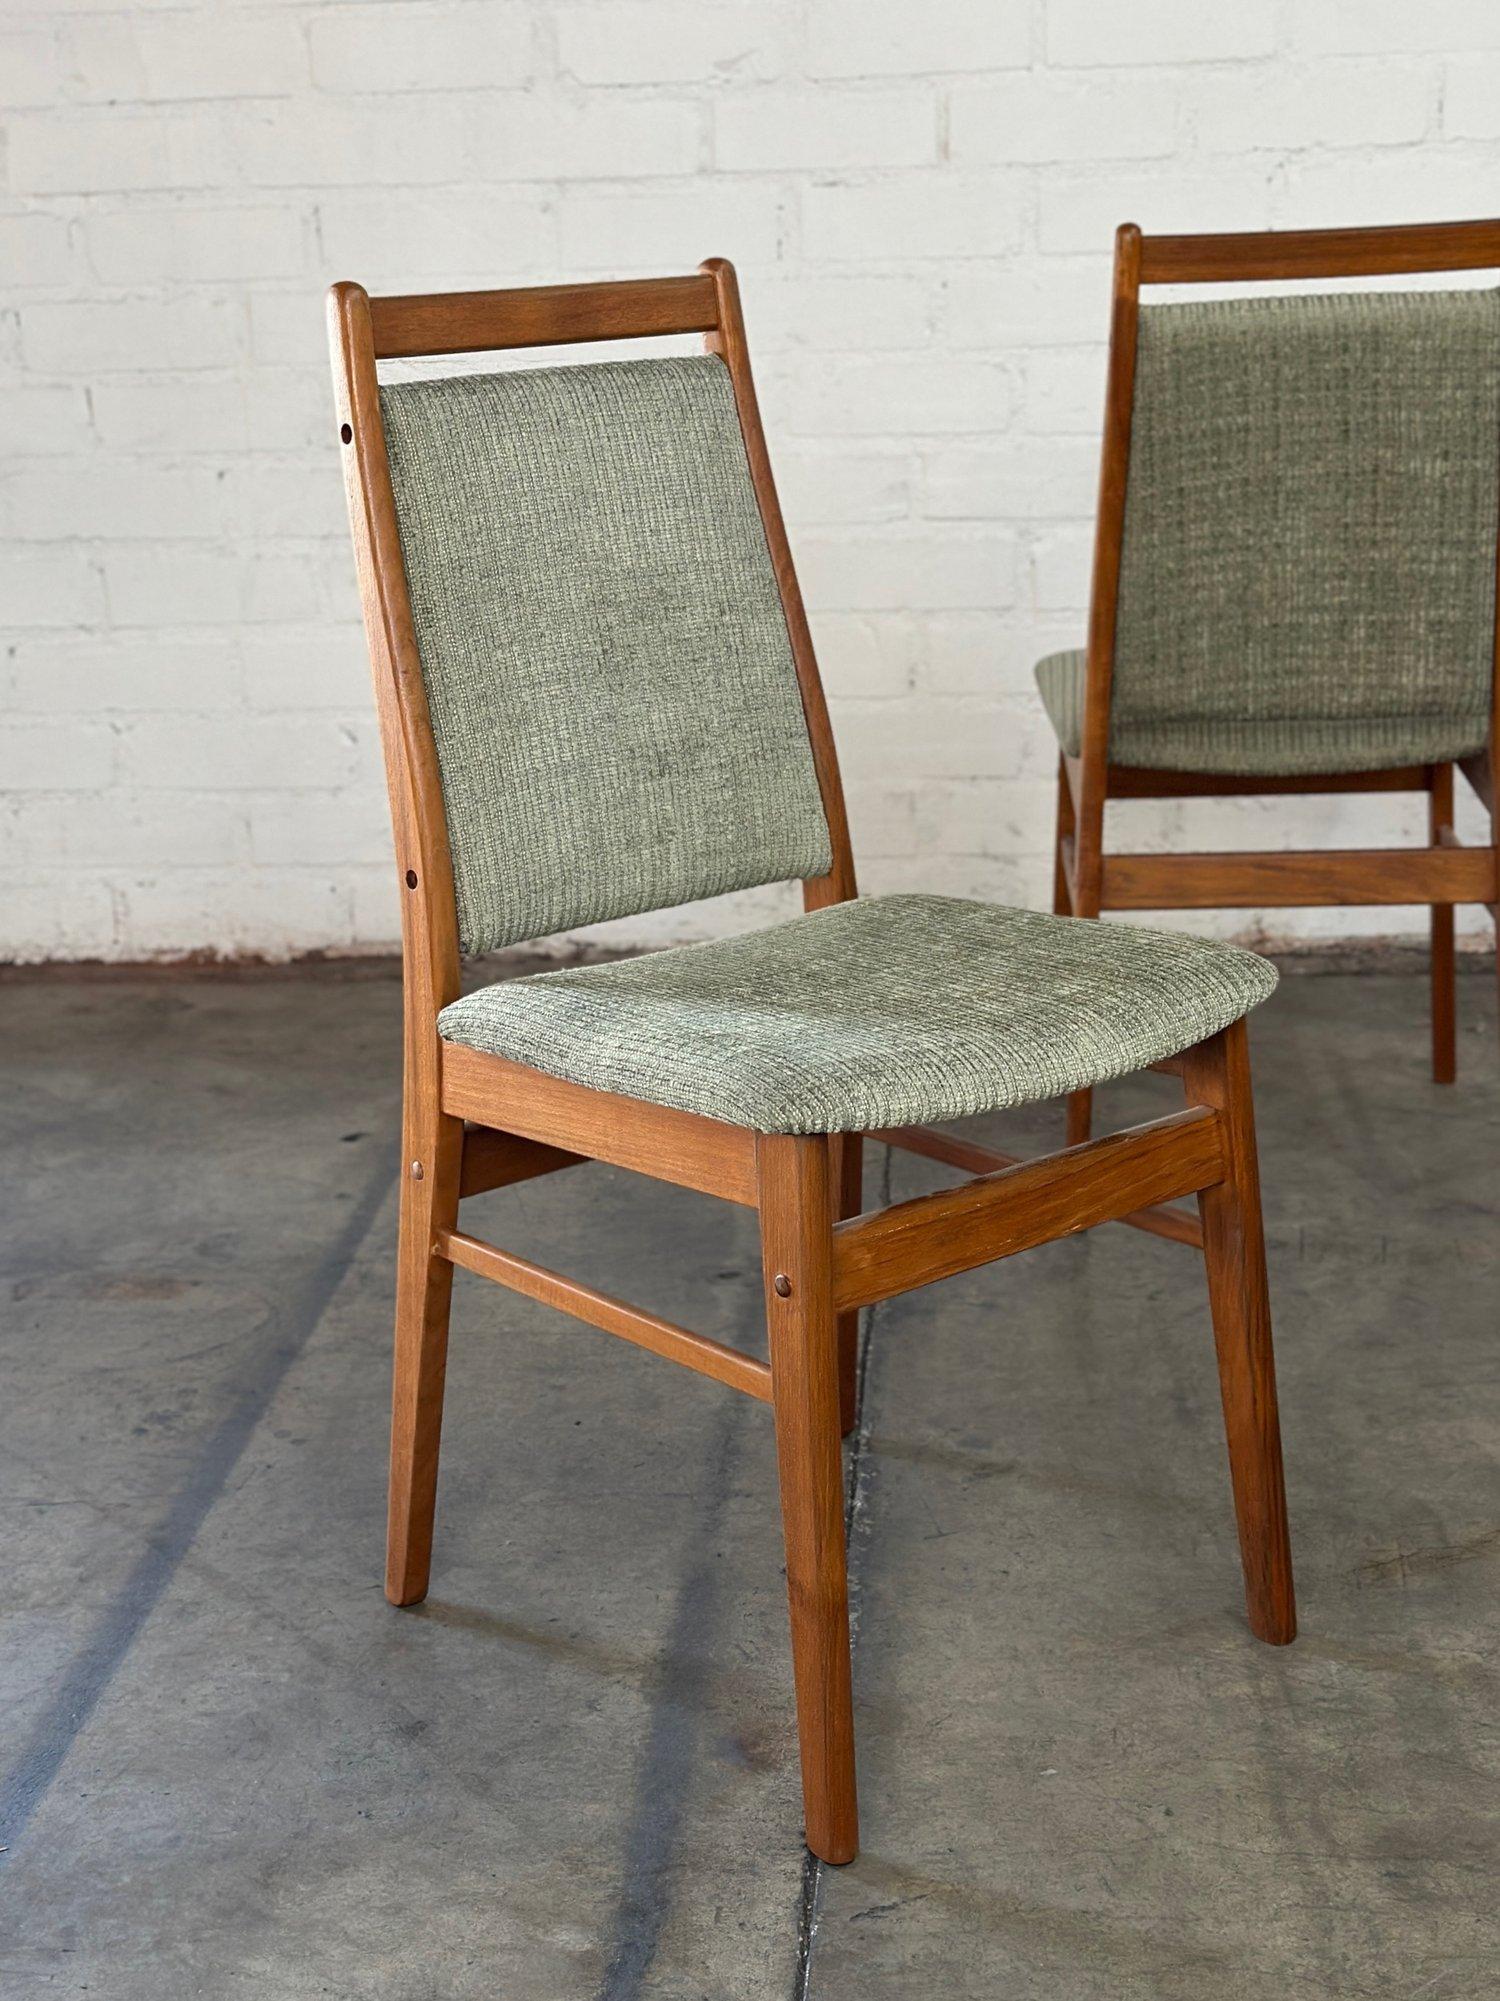 W17 D19 H36 SW18 SD16 SH18

Fully restored minimal teak dining chairs. Teak frames have been fully refinished, hardware replaced and wooden frames are sound and sturdy. Upholstery interior wooden components have been replaced where needed, seats and